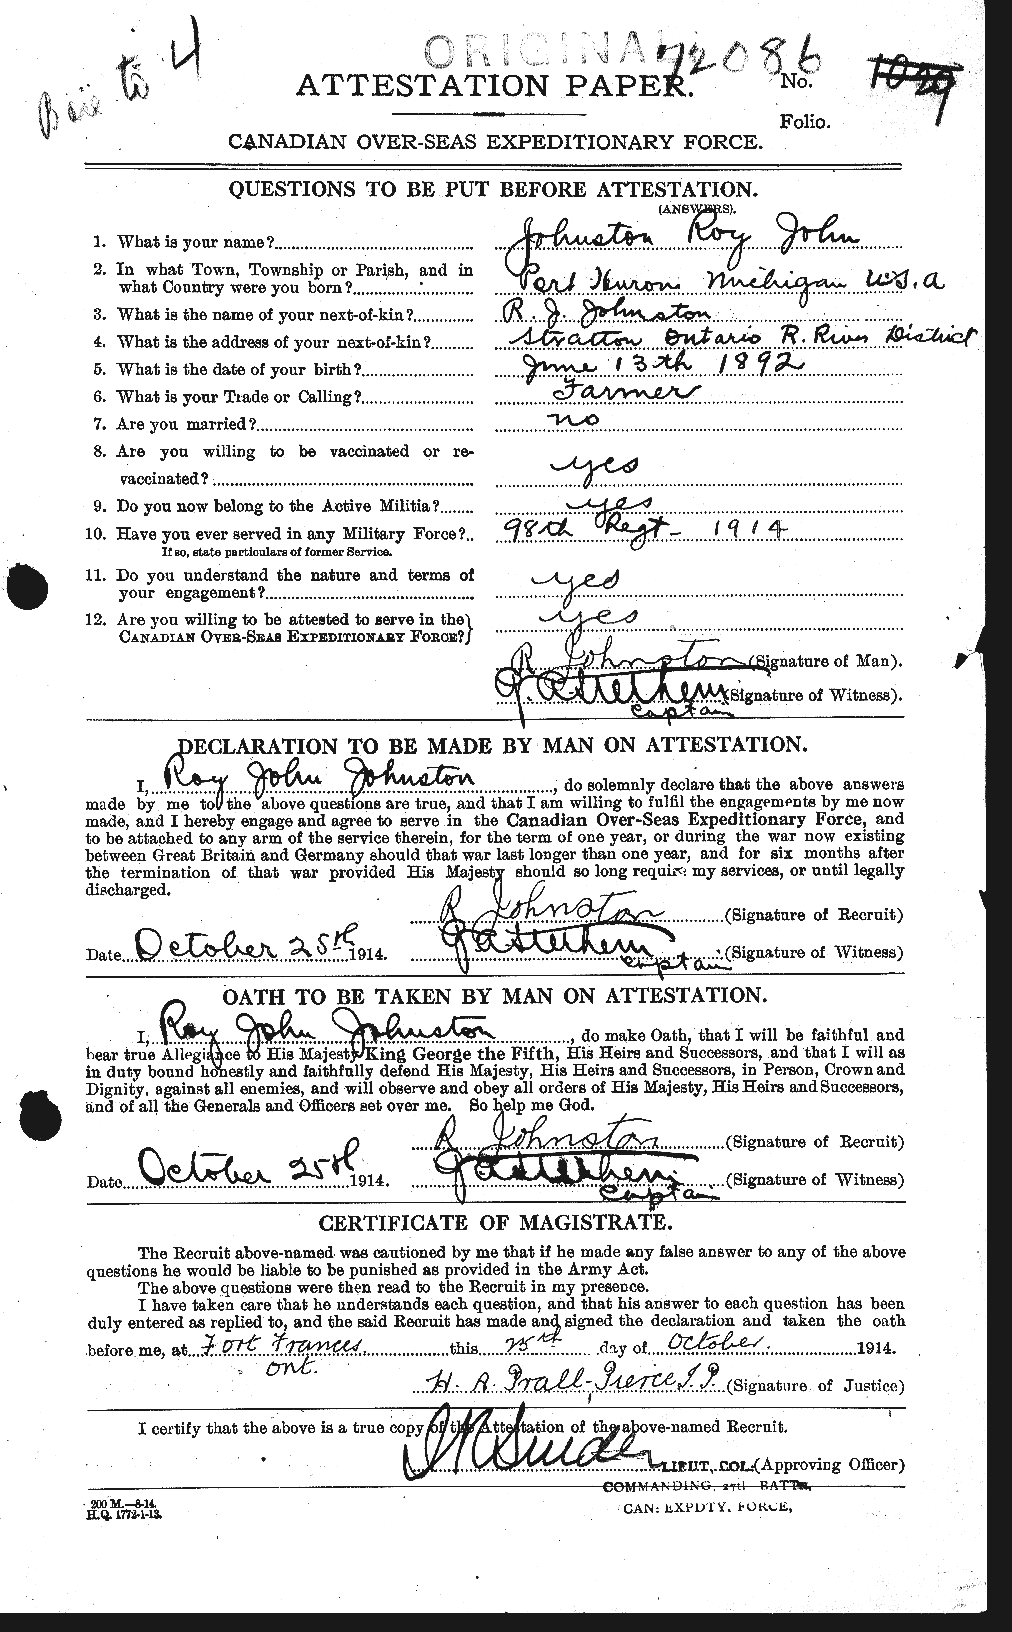 Personnel Records of the First World War - CEF 427065a